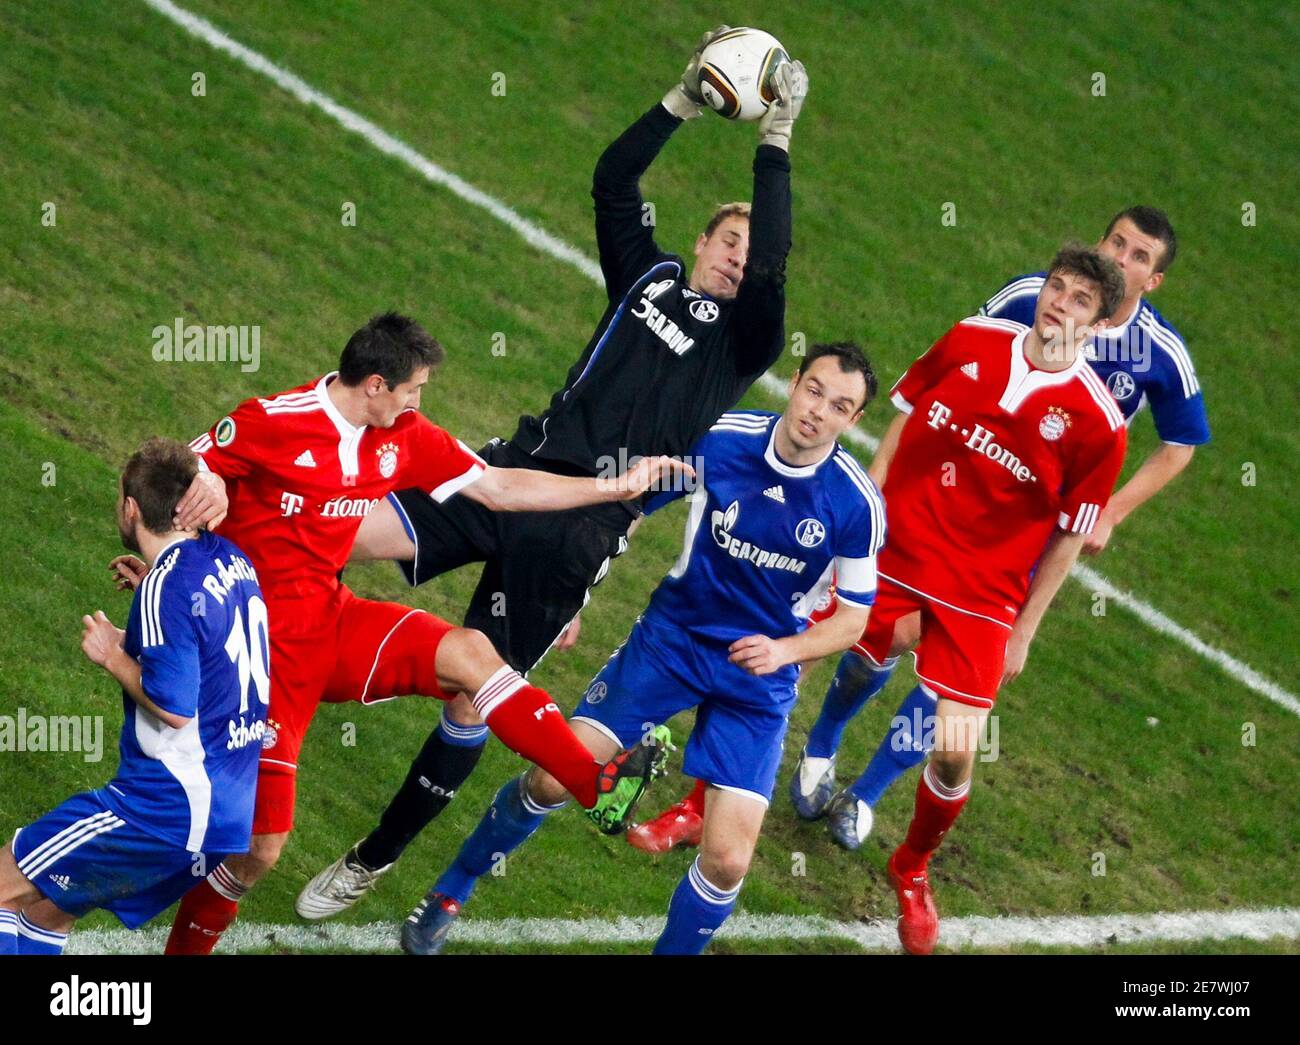 Manuel Neuer (C) of Schalke 04 makes a save during their German soccer cup,  DFB-Pokal, semi-final match against Bayern Munich in Gelsenkirchen, March  24, 2010. REUTERS/Wolfgang Rattay (GERMANY) DFB RULES PROHIBIT USE